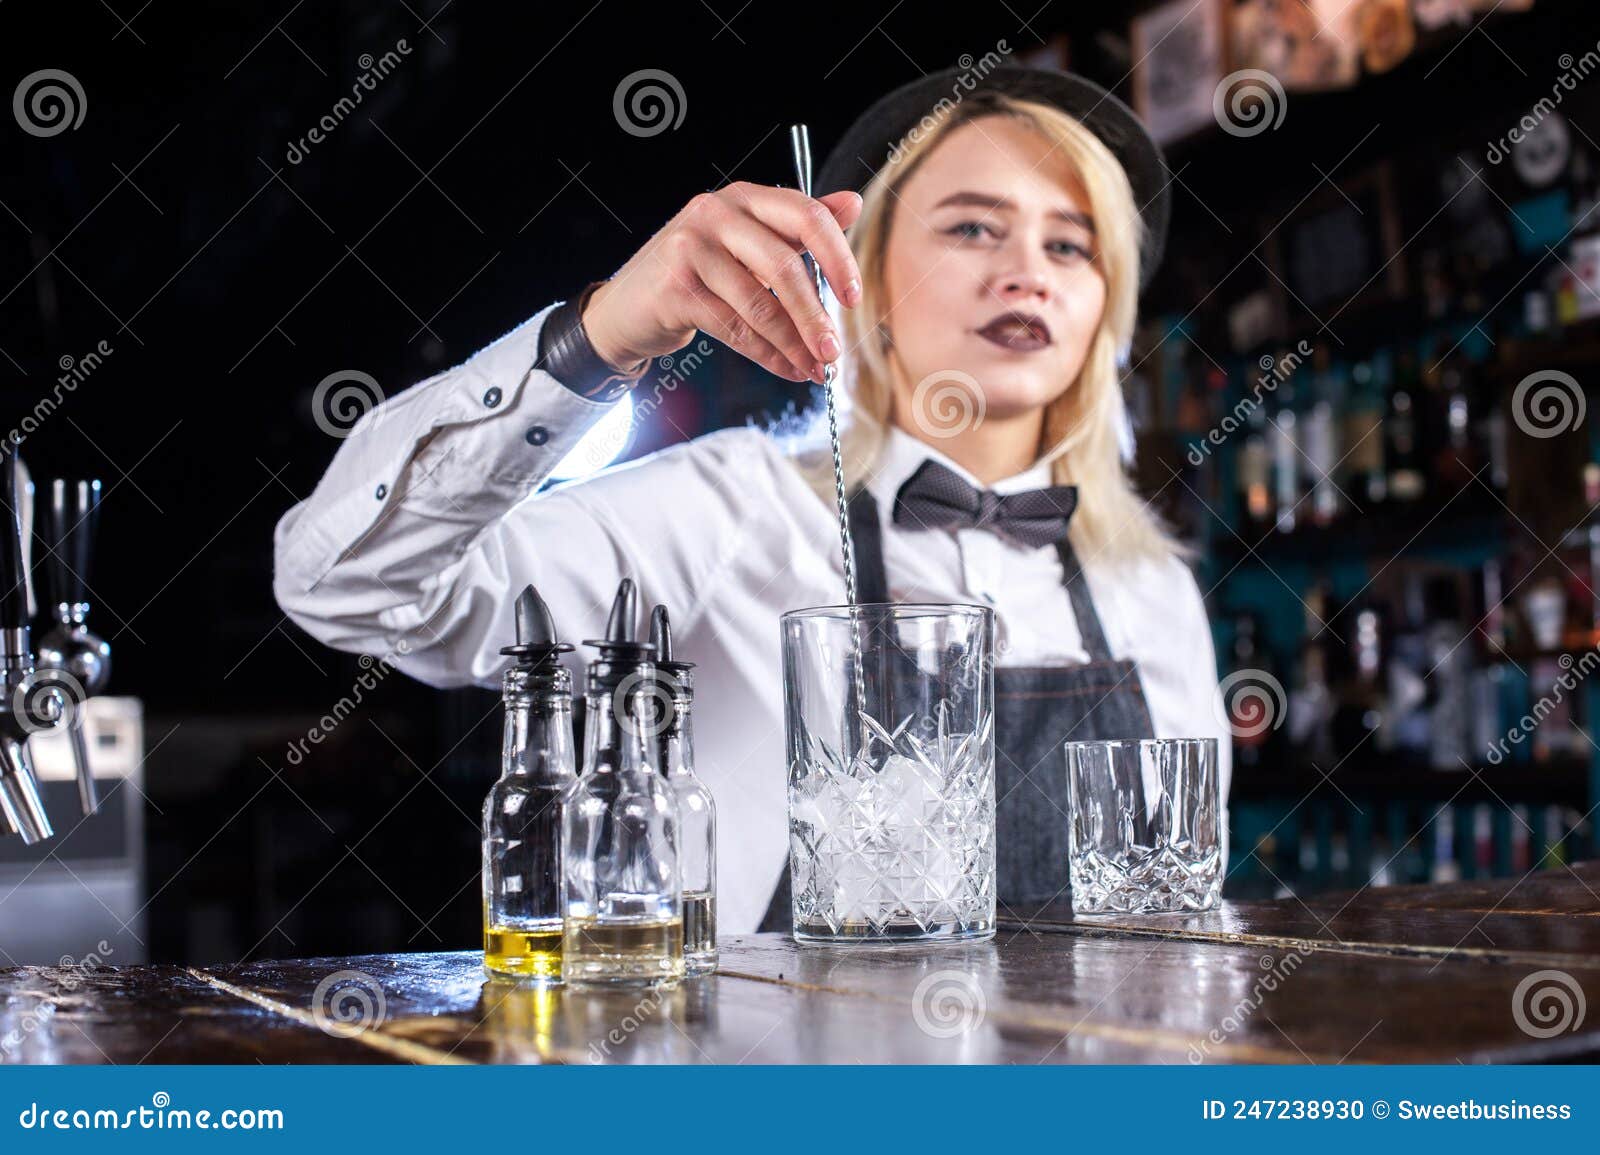 Girl Bartender Makes a Cocktail on the Bar Stock Photo - Image of dirnk ...